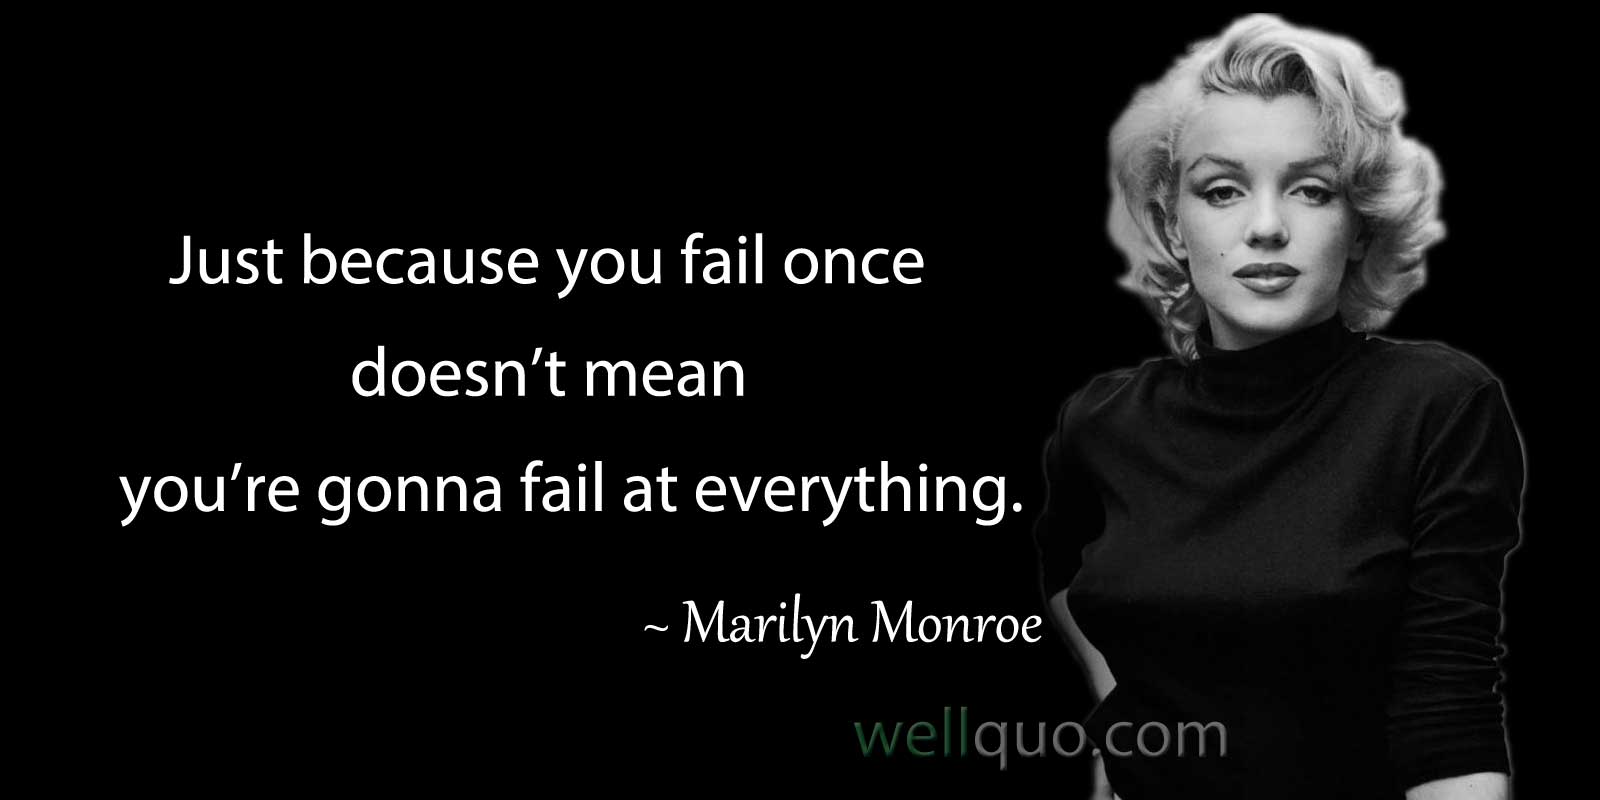 keep smiling quotes marilyn monroe